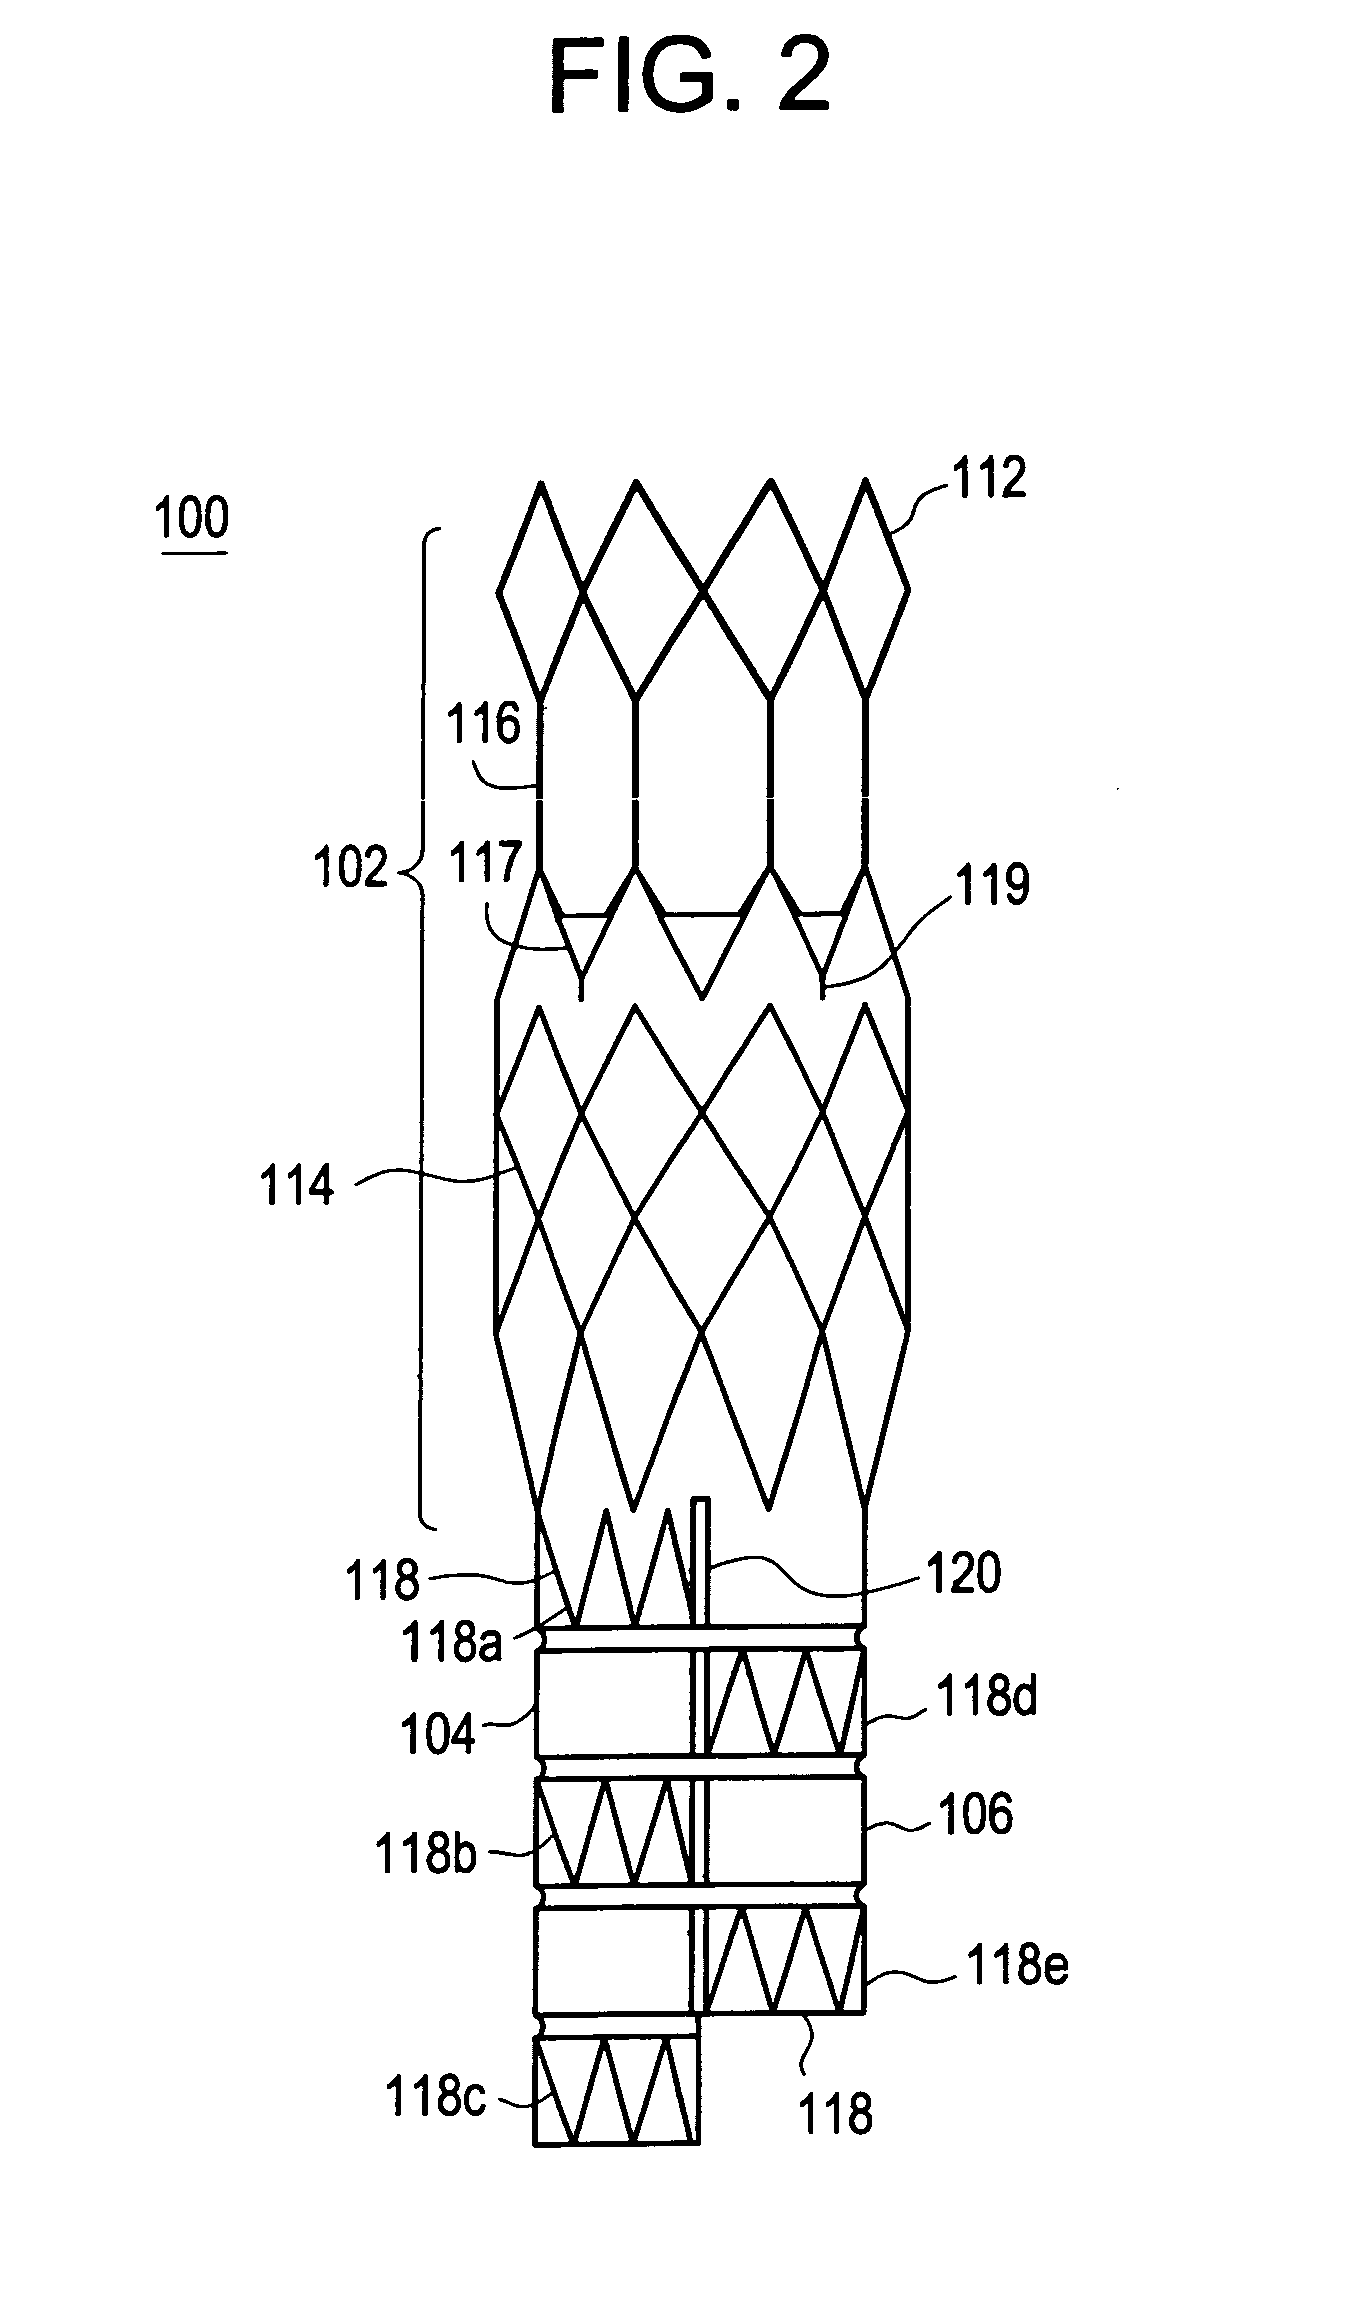 AAA repair device with aneurysm sac access port